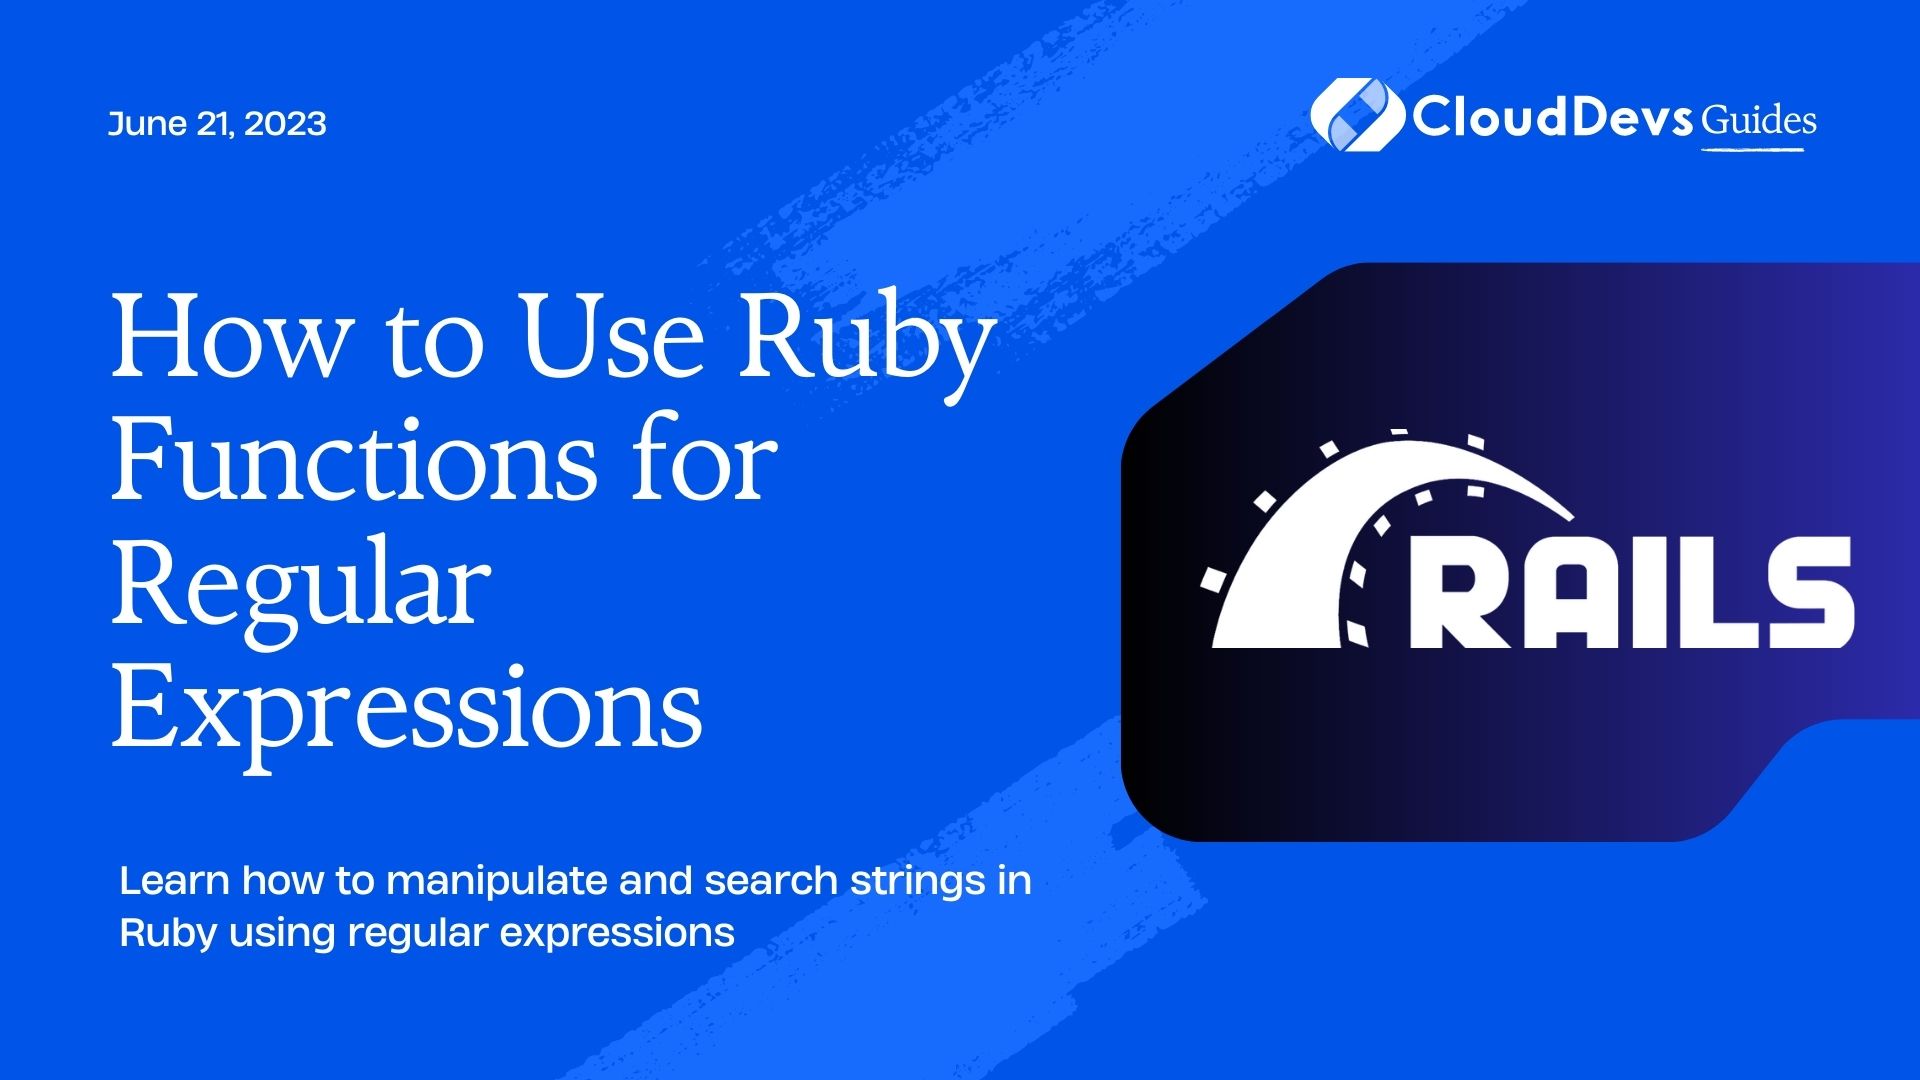 How to Use Ruby Functions for Regular Expressions